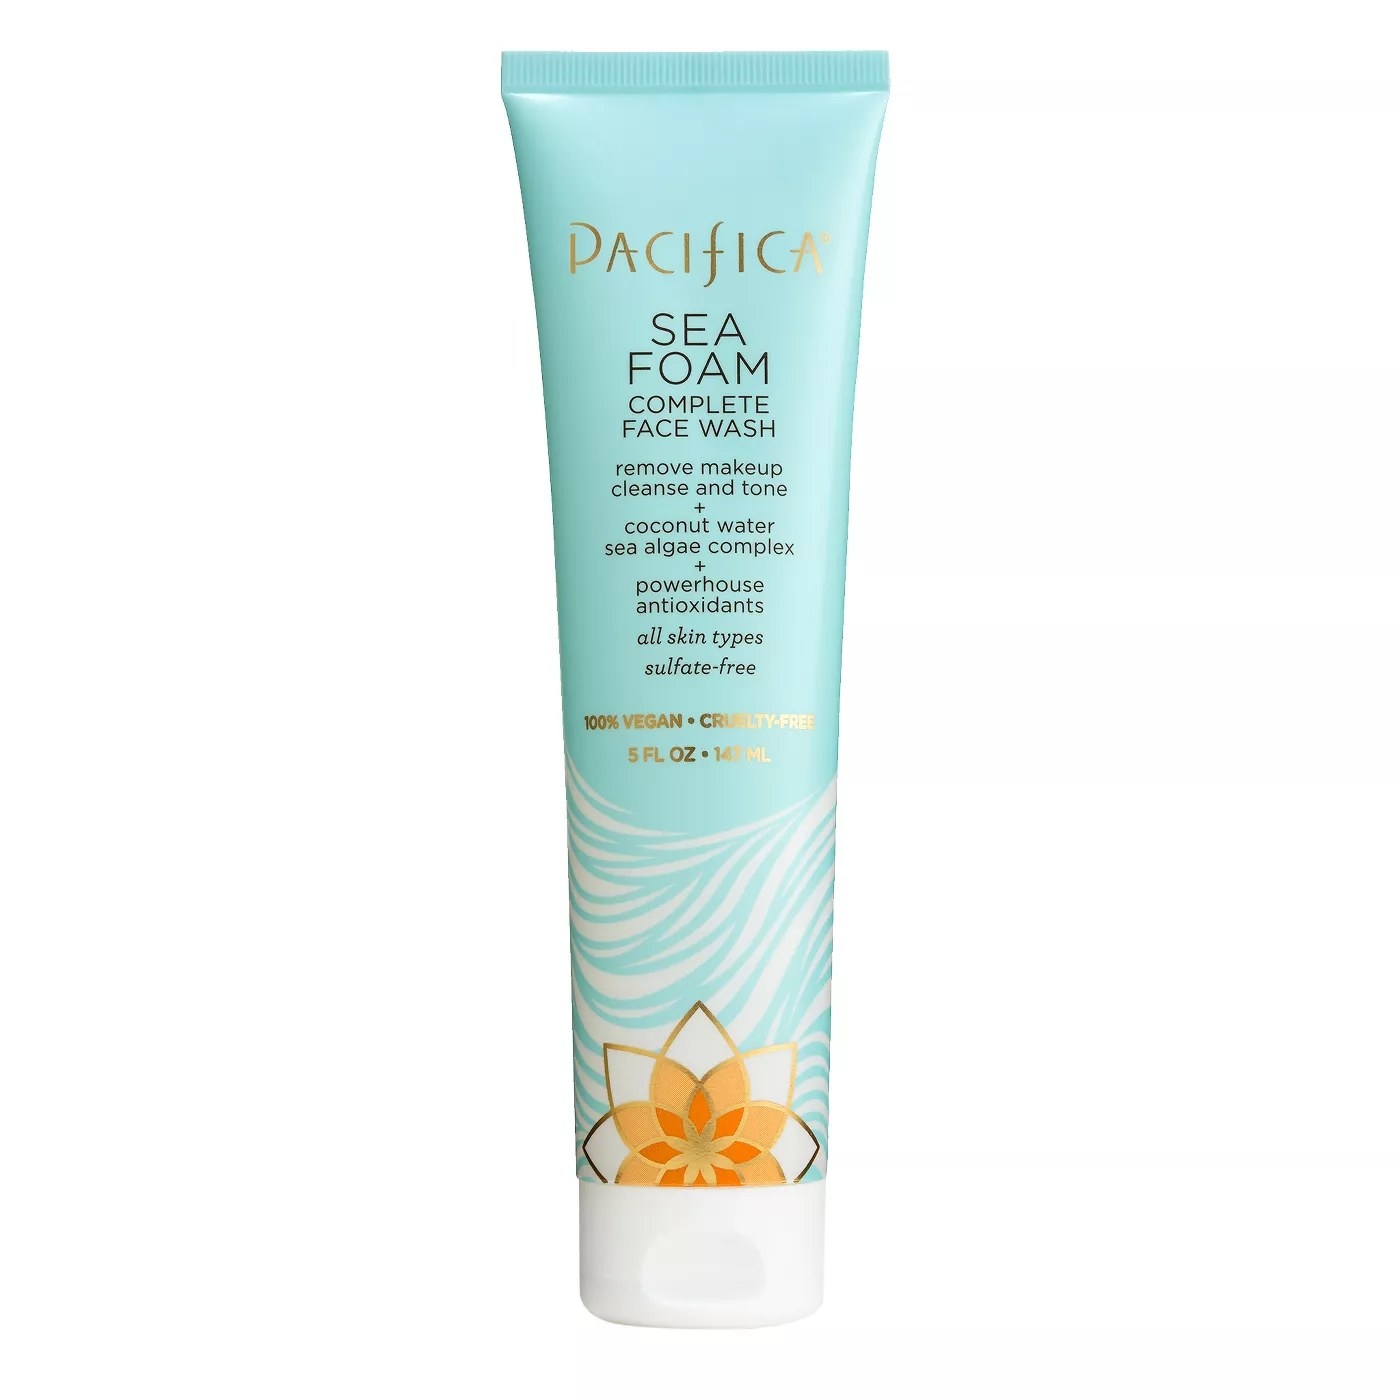 Pacifica Sea Foam Complete Face Wash removes makeup, cleanses, and tones all skin types with coconut water, sea algae complex, and a powerhouse of antioxidants